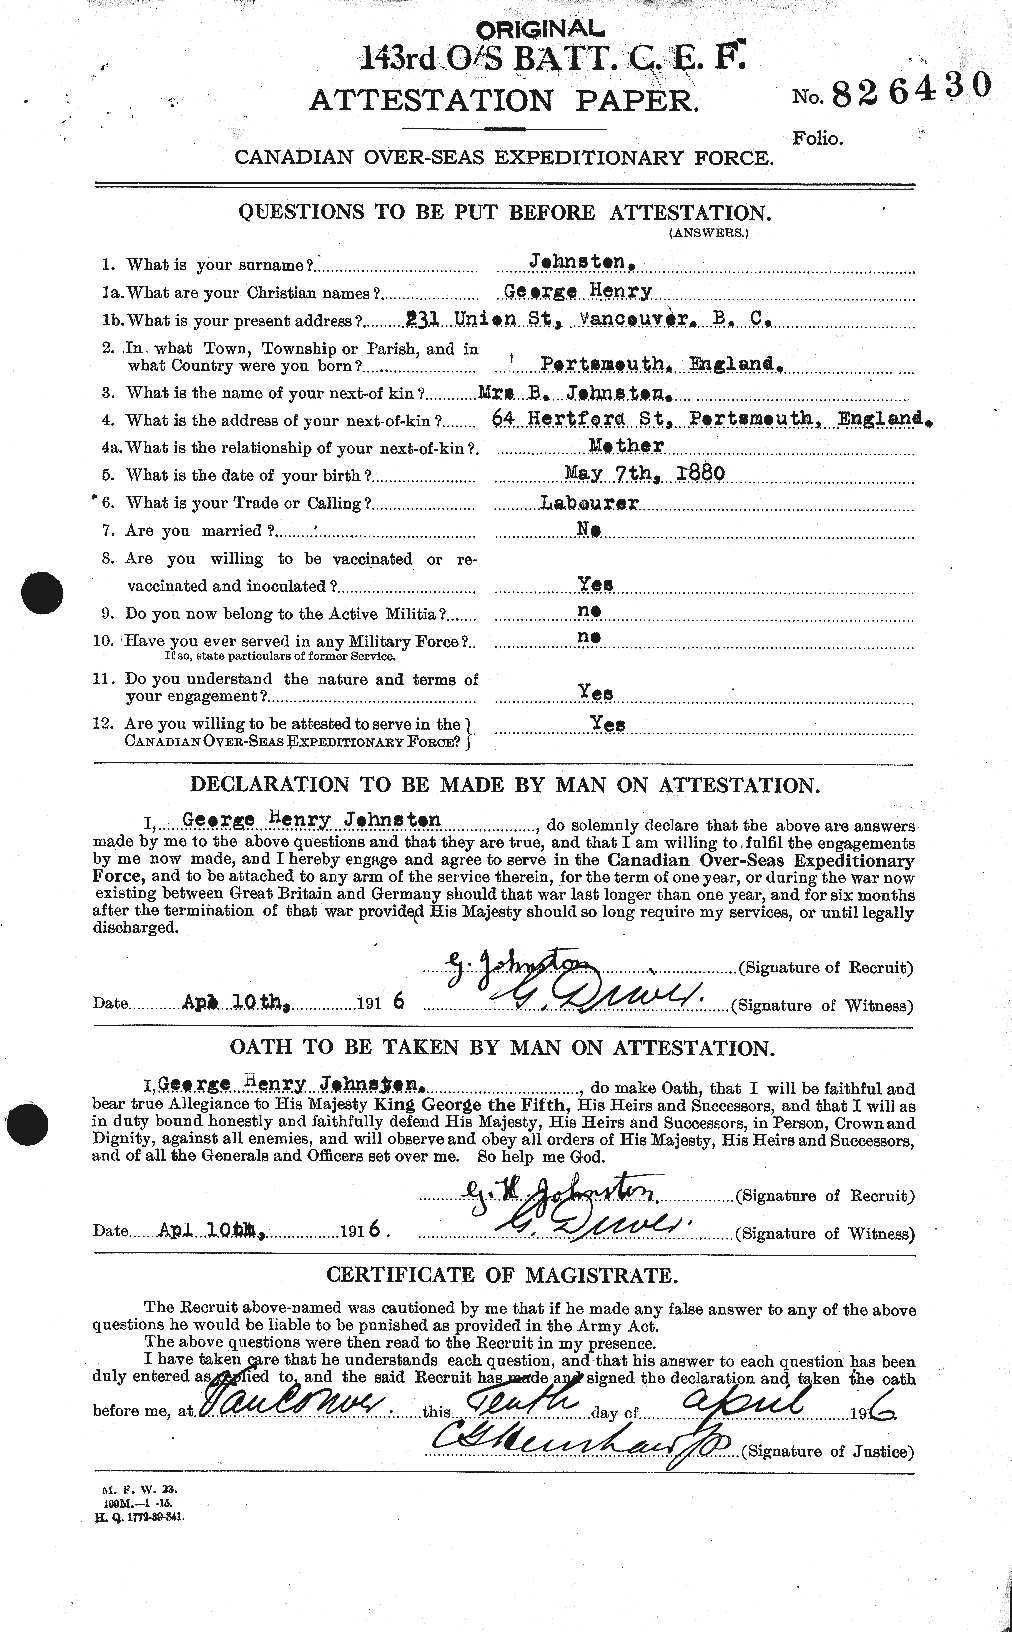 Personnel Records of the First World War - CEF 419426a